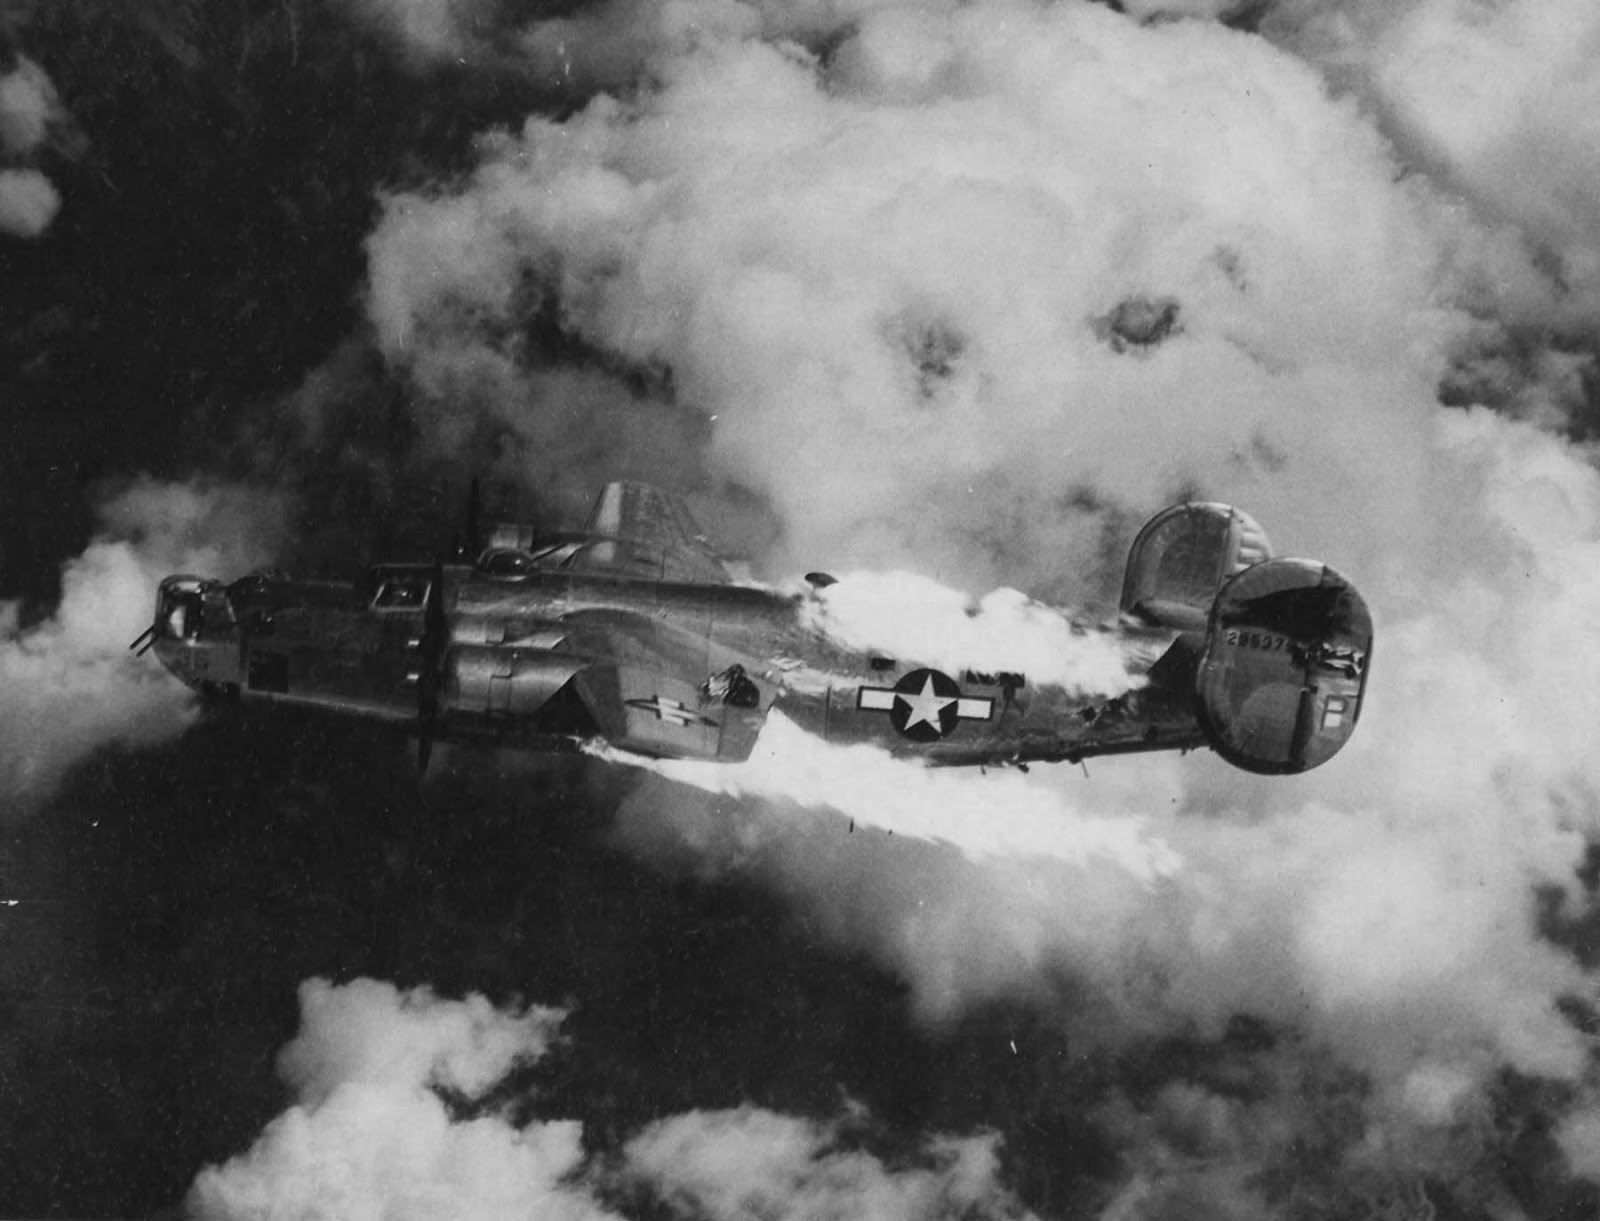 This aircraft is pictured just moments before it burst into flames and went out of control, all ten crew members were killed in action.